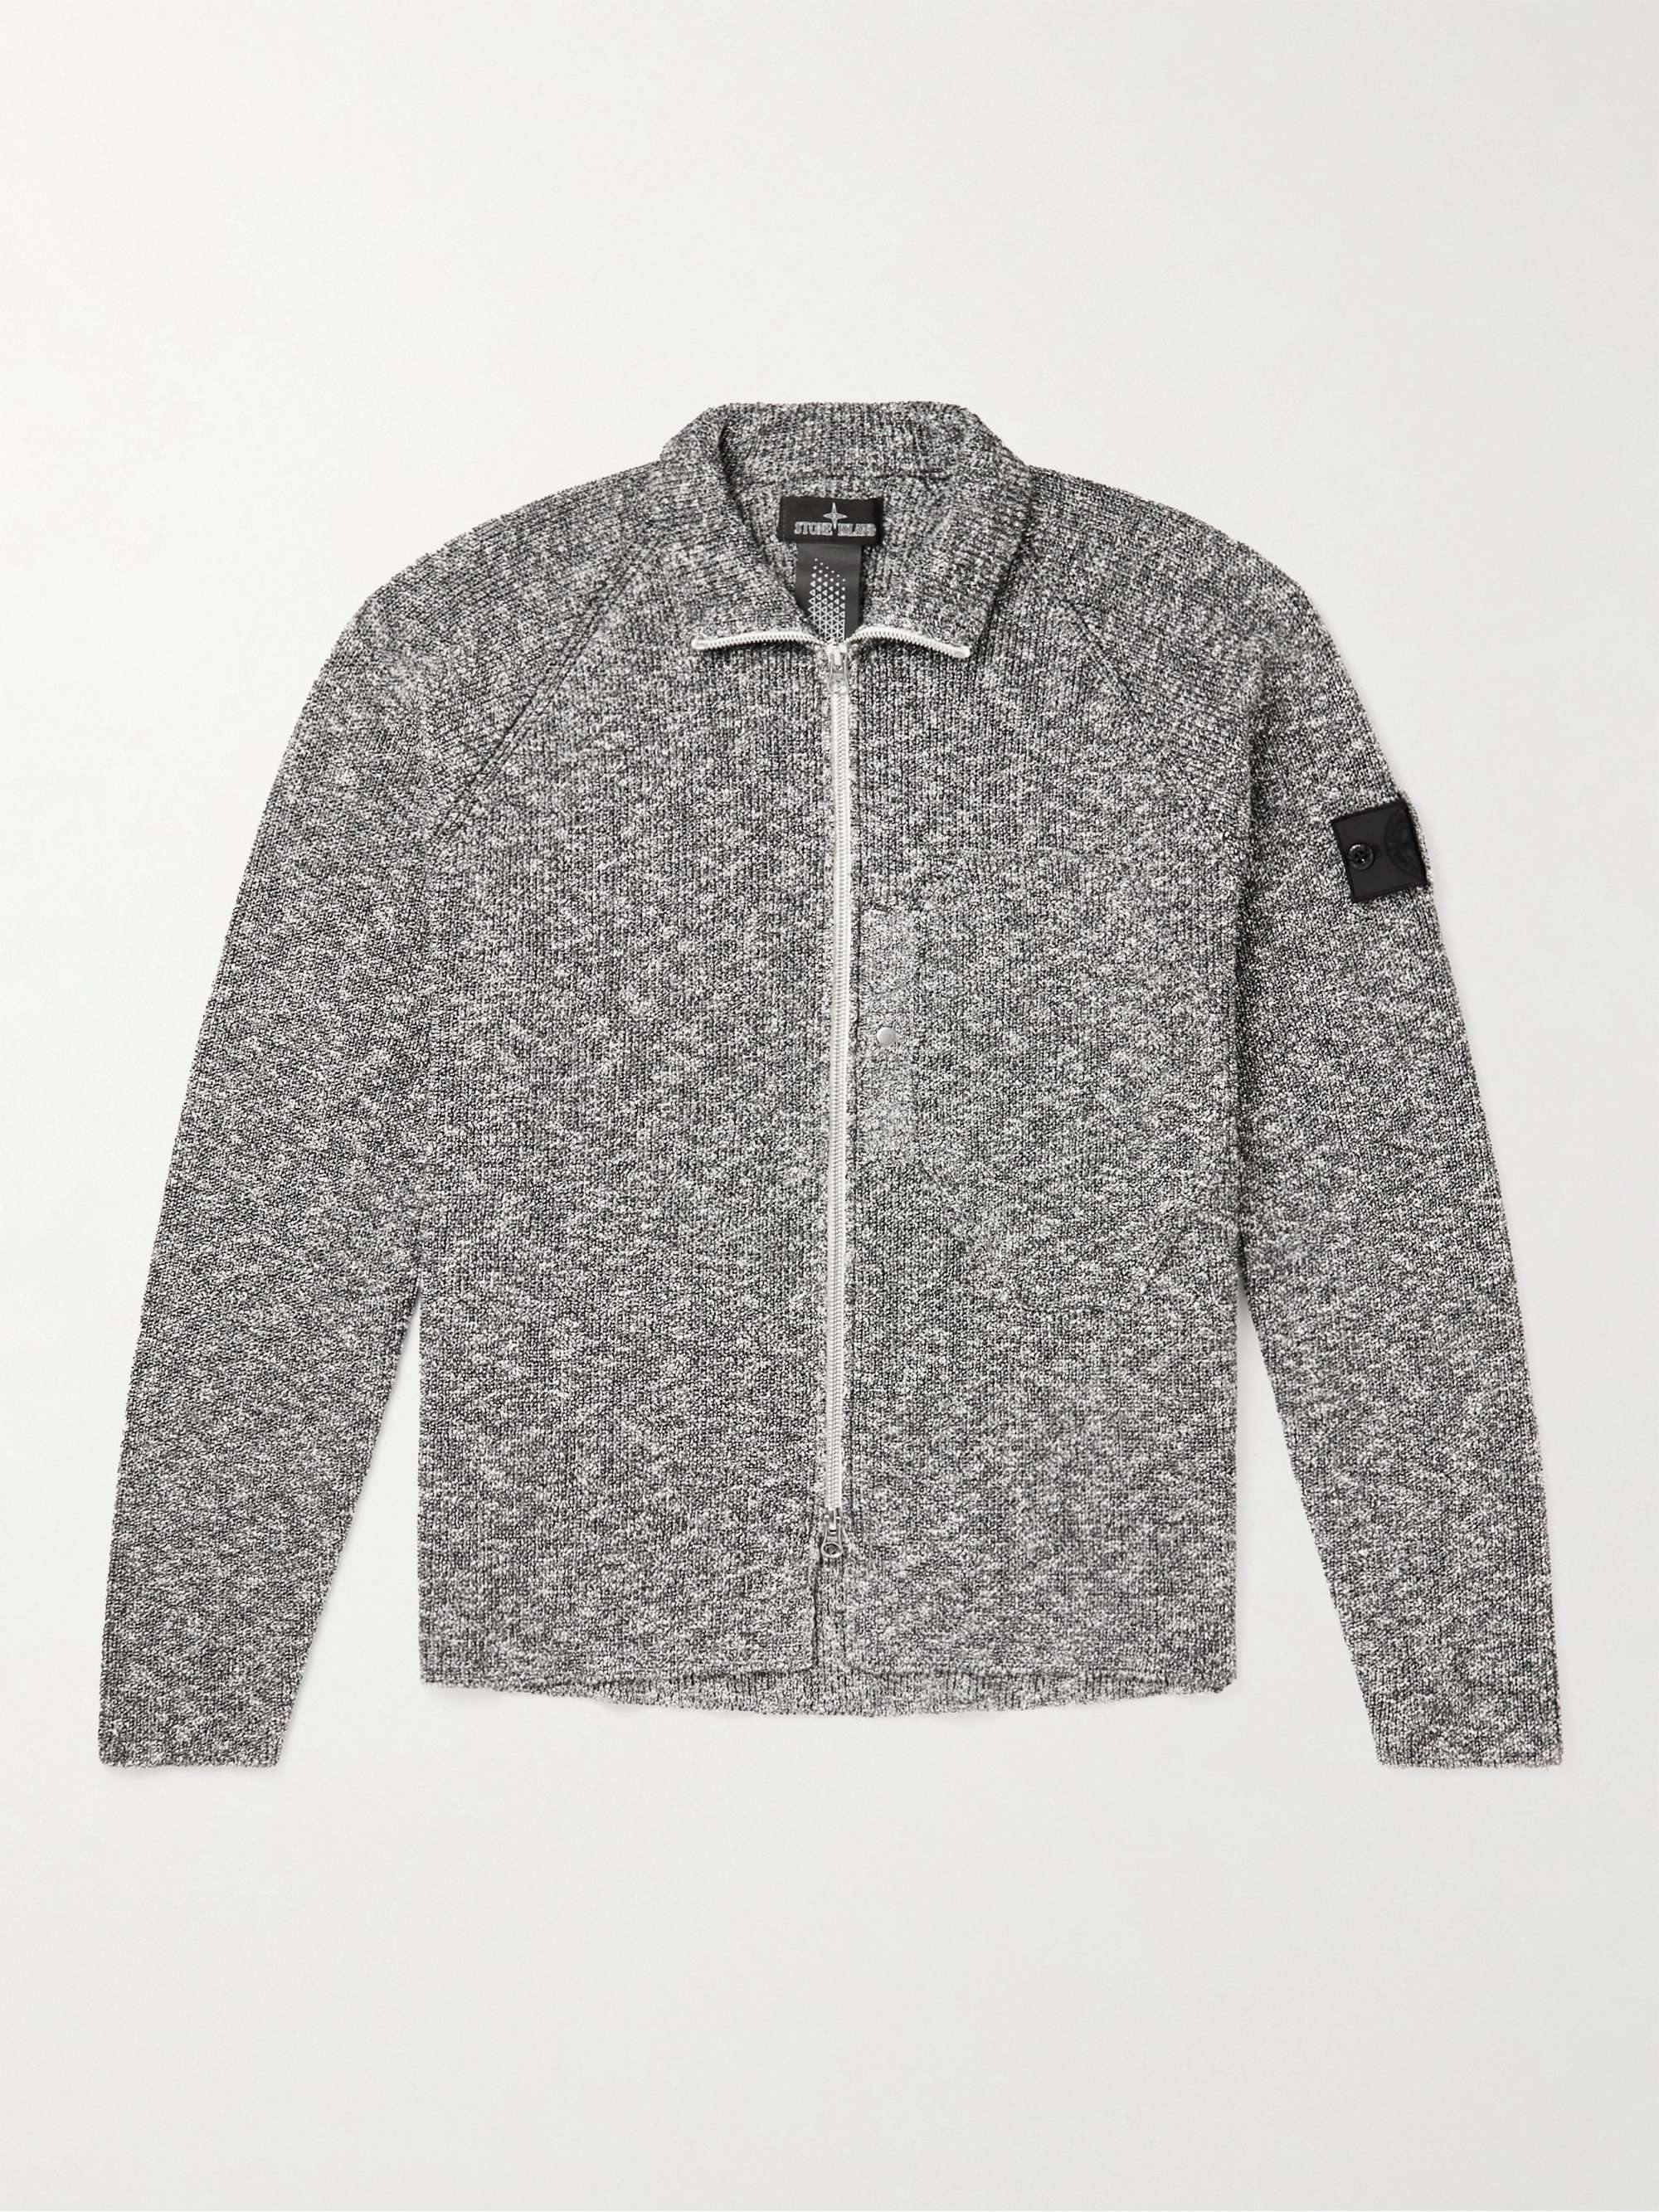 STONE ISLAND SHADOW PROJECT Logo-Appliquéd Knitted Zip-Up Cardigan for ...